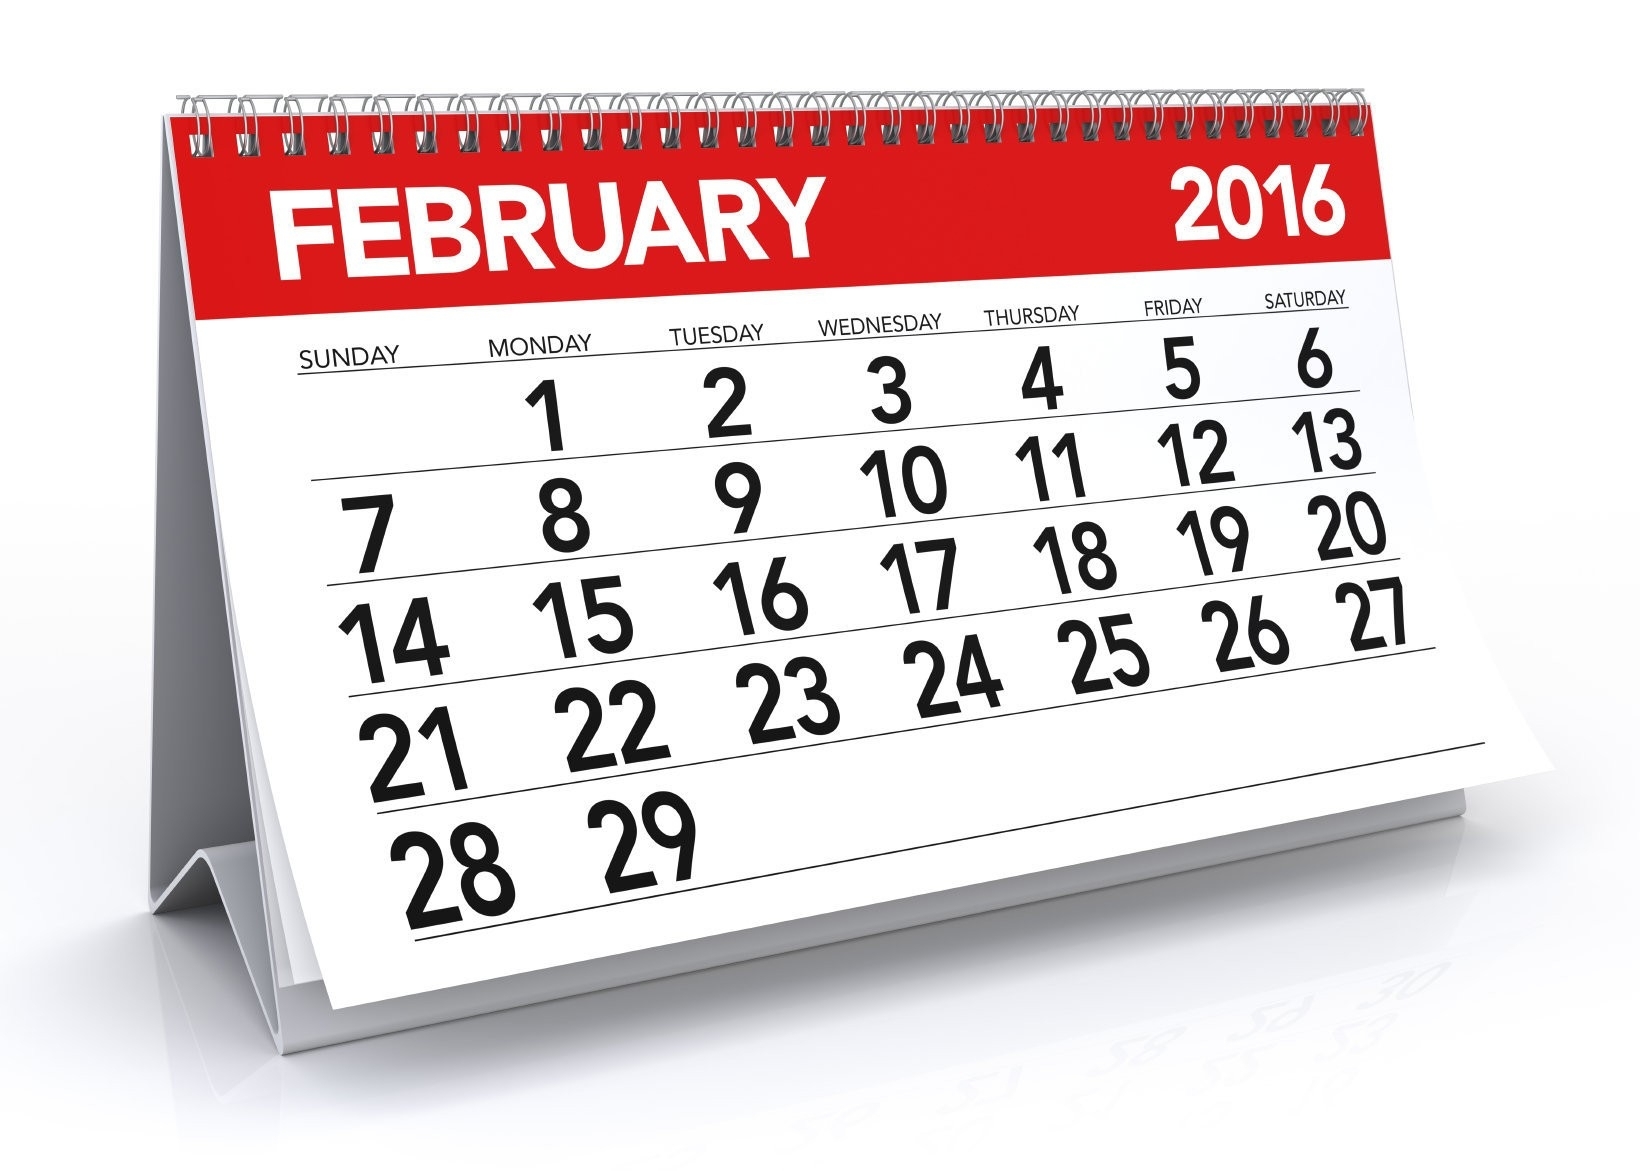 Feb. 29, 2016; Your Leap Year And Leap Day Questions